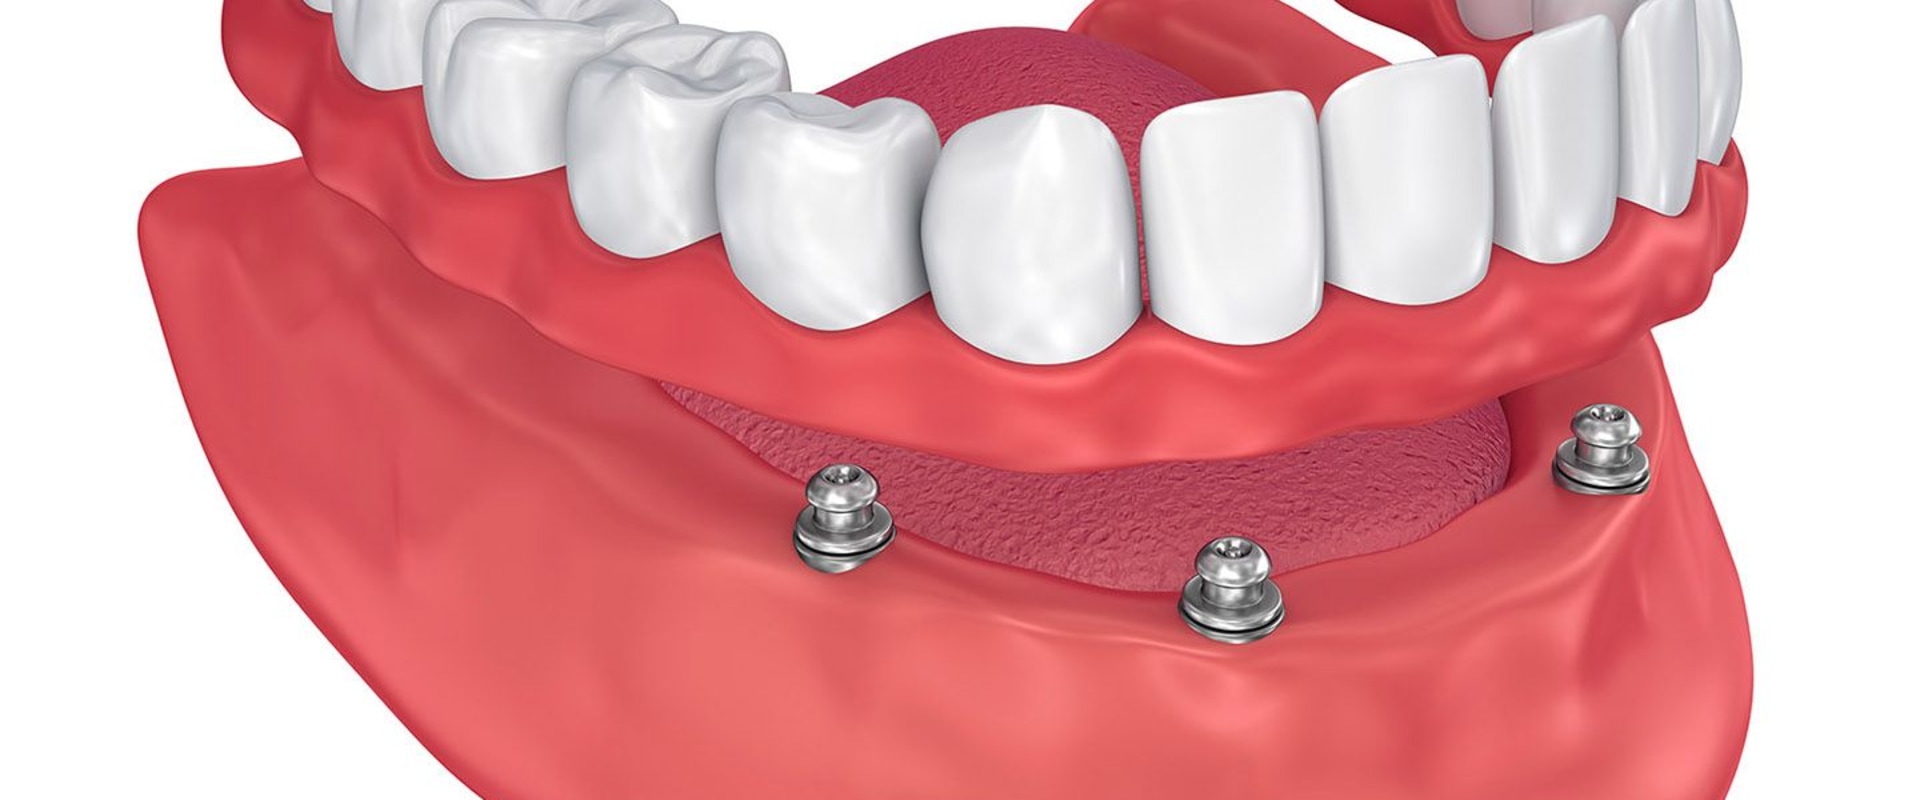 Can All-on-Four Dentures Be Adjusted?